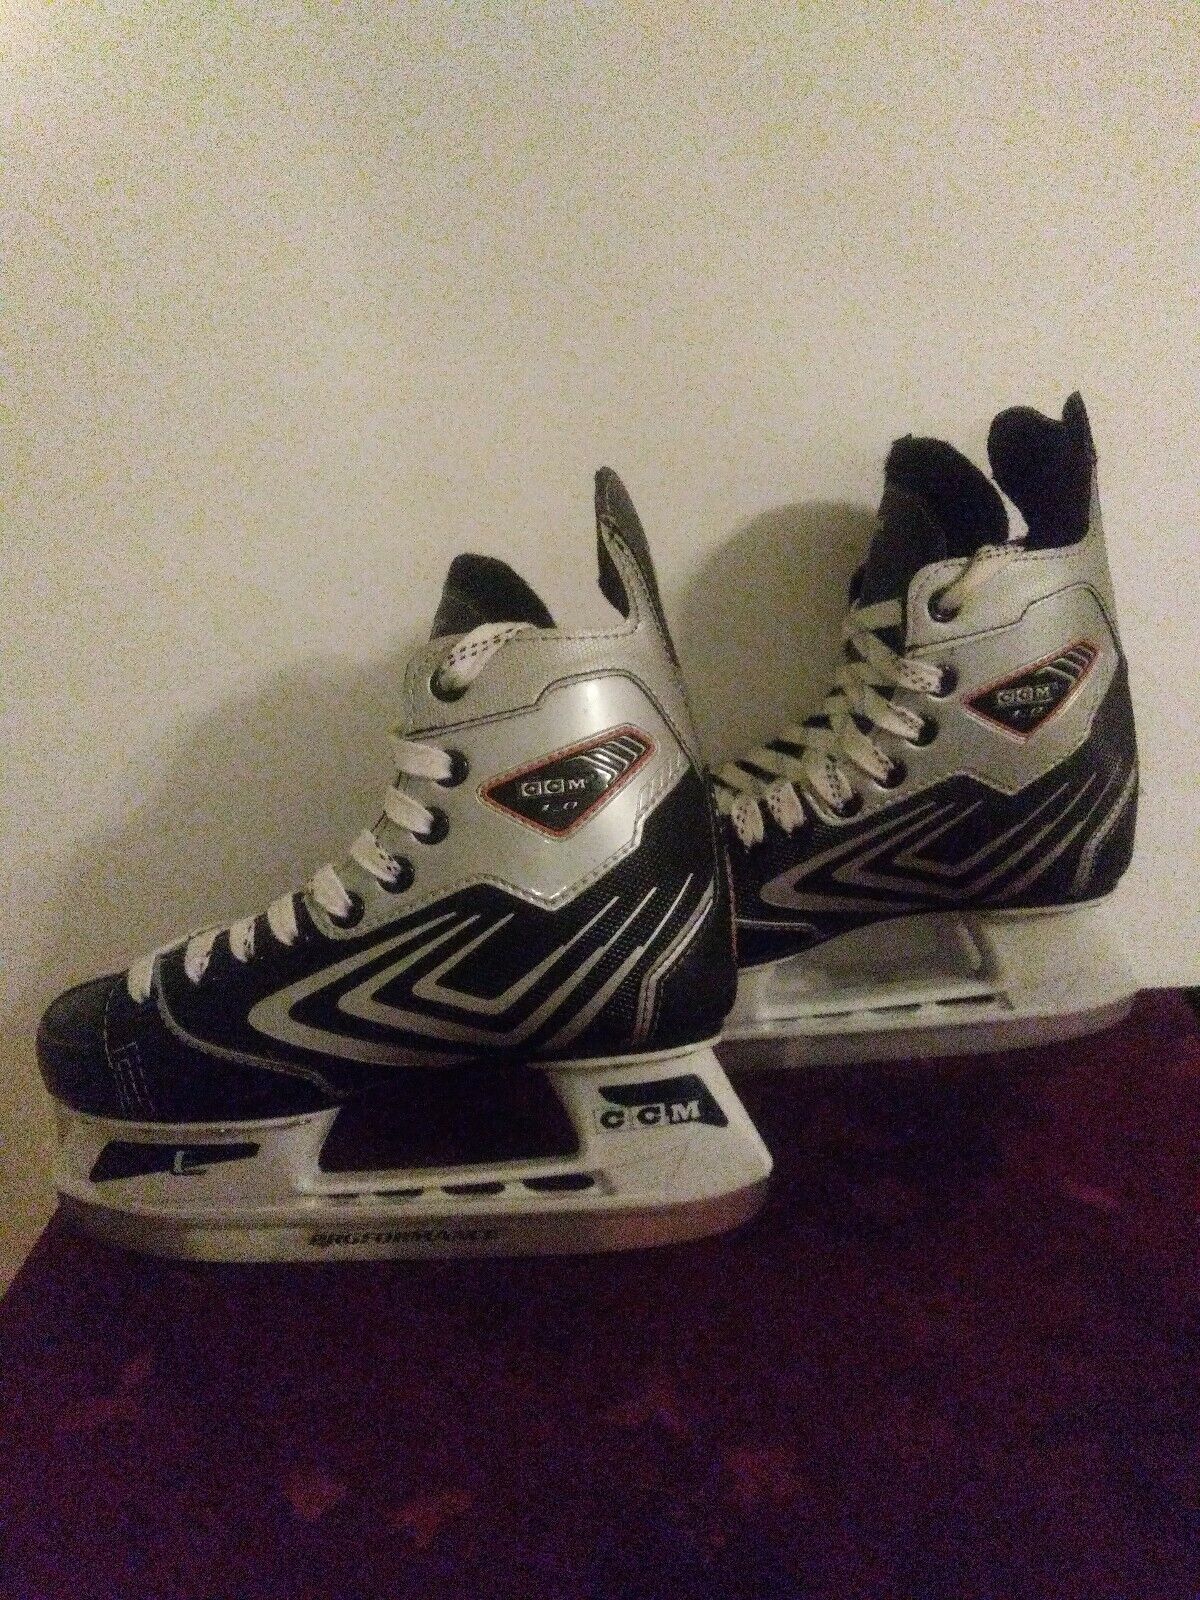 Bargain sale CCM NHL 88 Vector Challenge the lowest price of Japan ☆ 1.0 Ice Size Youth Hockey 4 Skates Skate